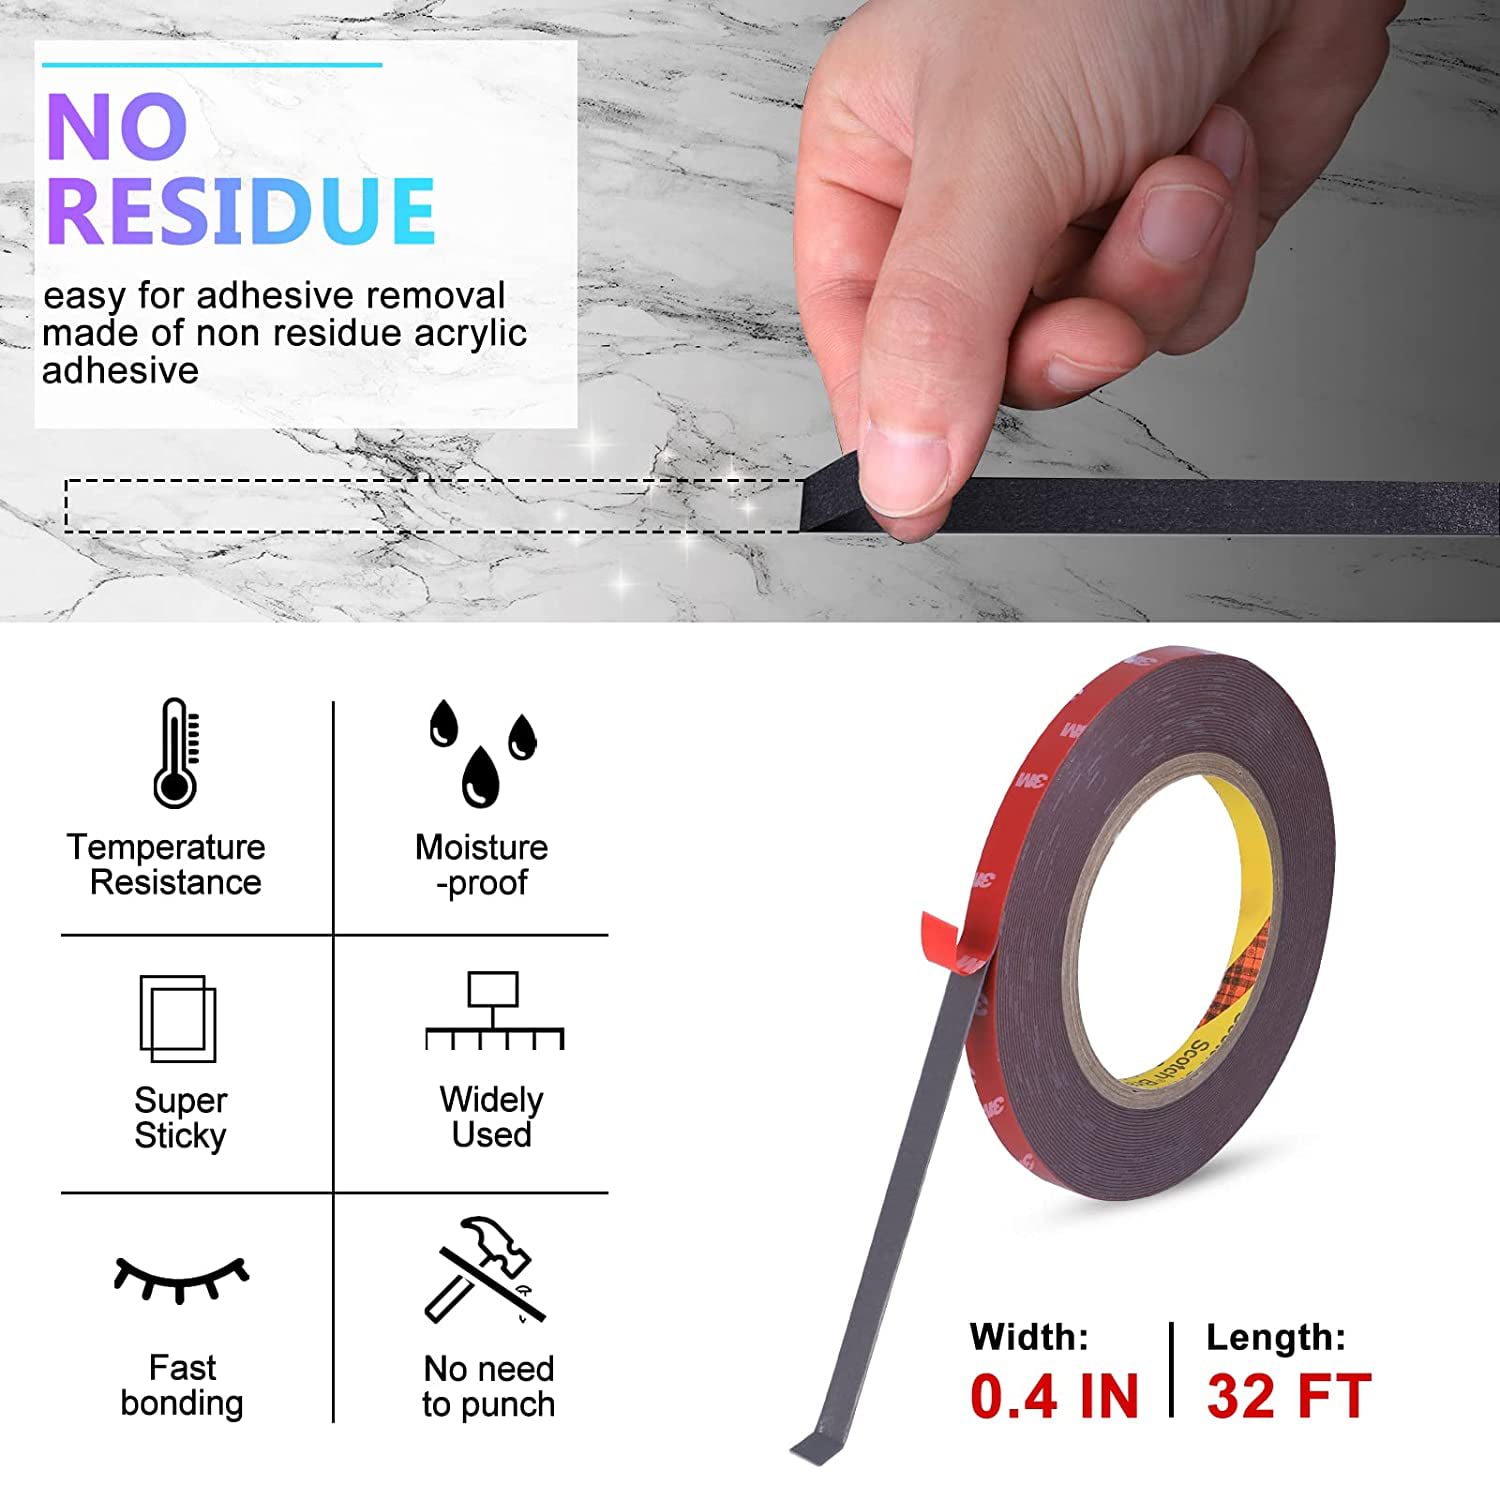 Acrylic Adhesive Heavy Duty Mounting Tape Removable & Residue-Free for Home Decor,Wall Decor,Room Decor,Office Decor,Photo Frame Mounting 0.4inch Width Double Sided Tape 